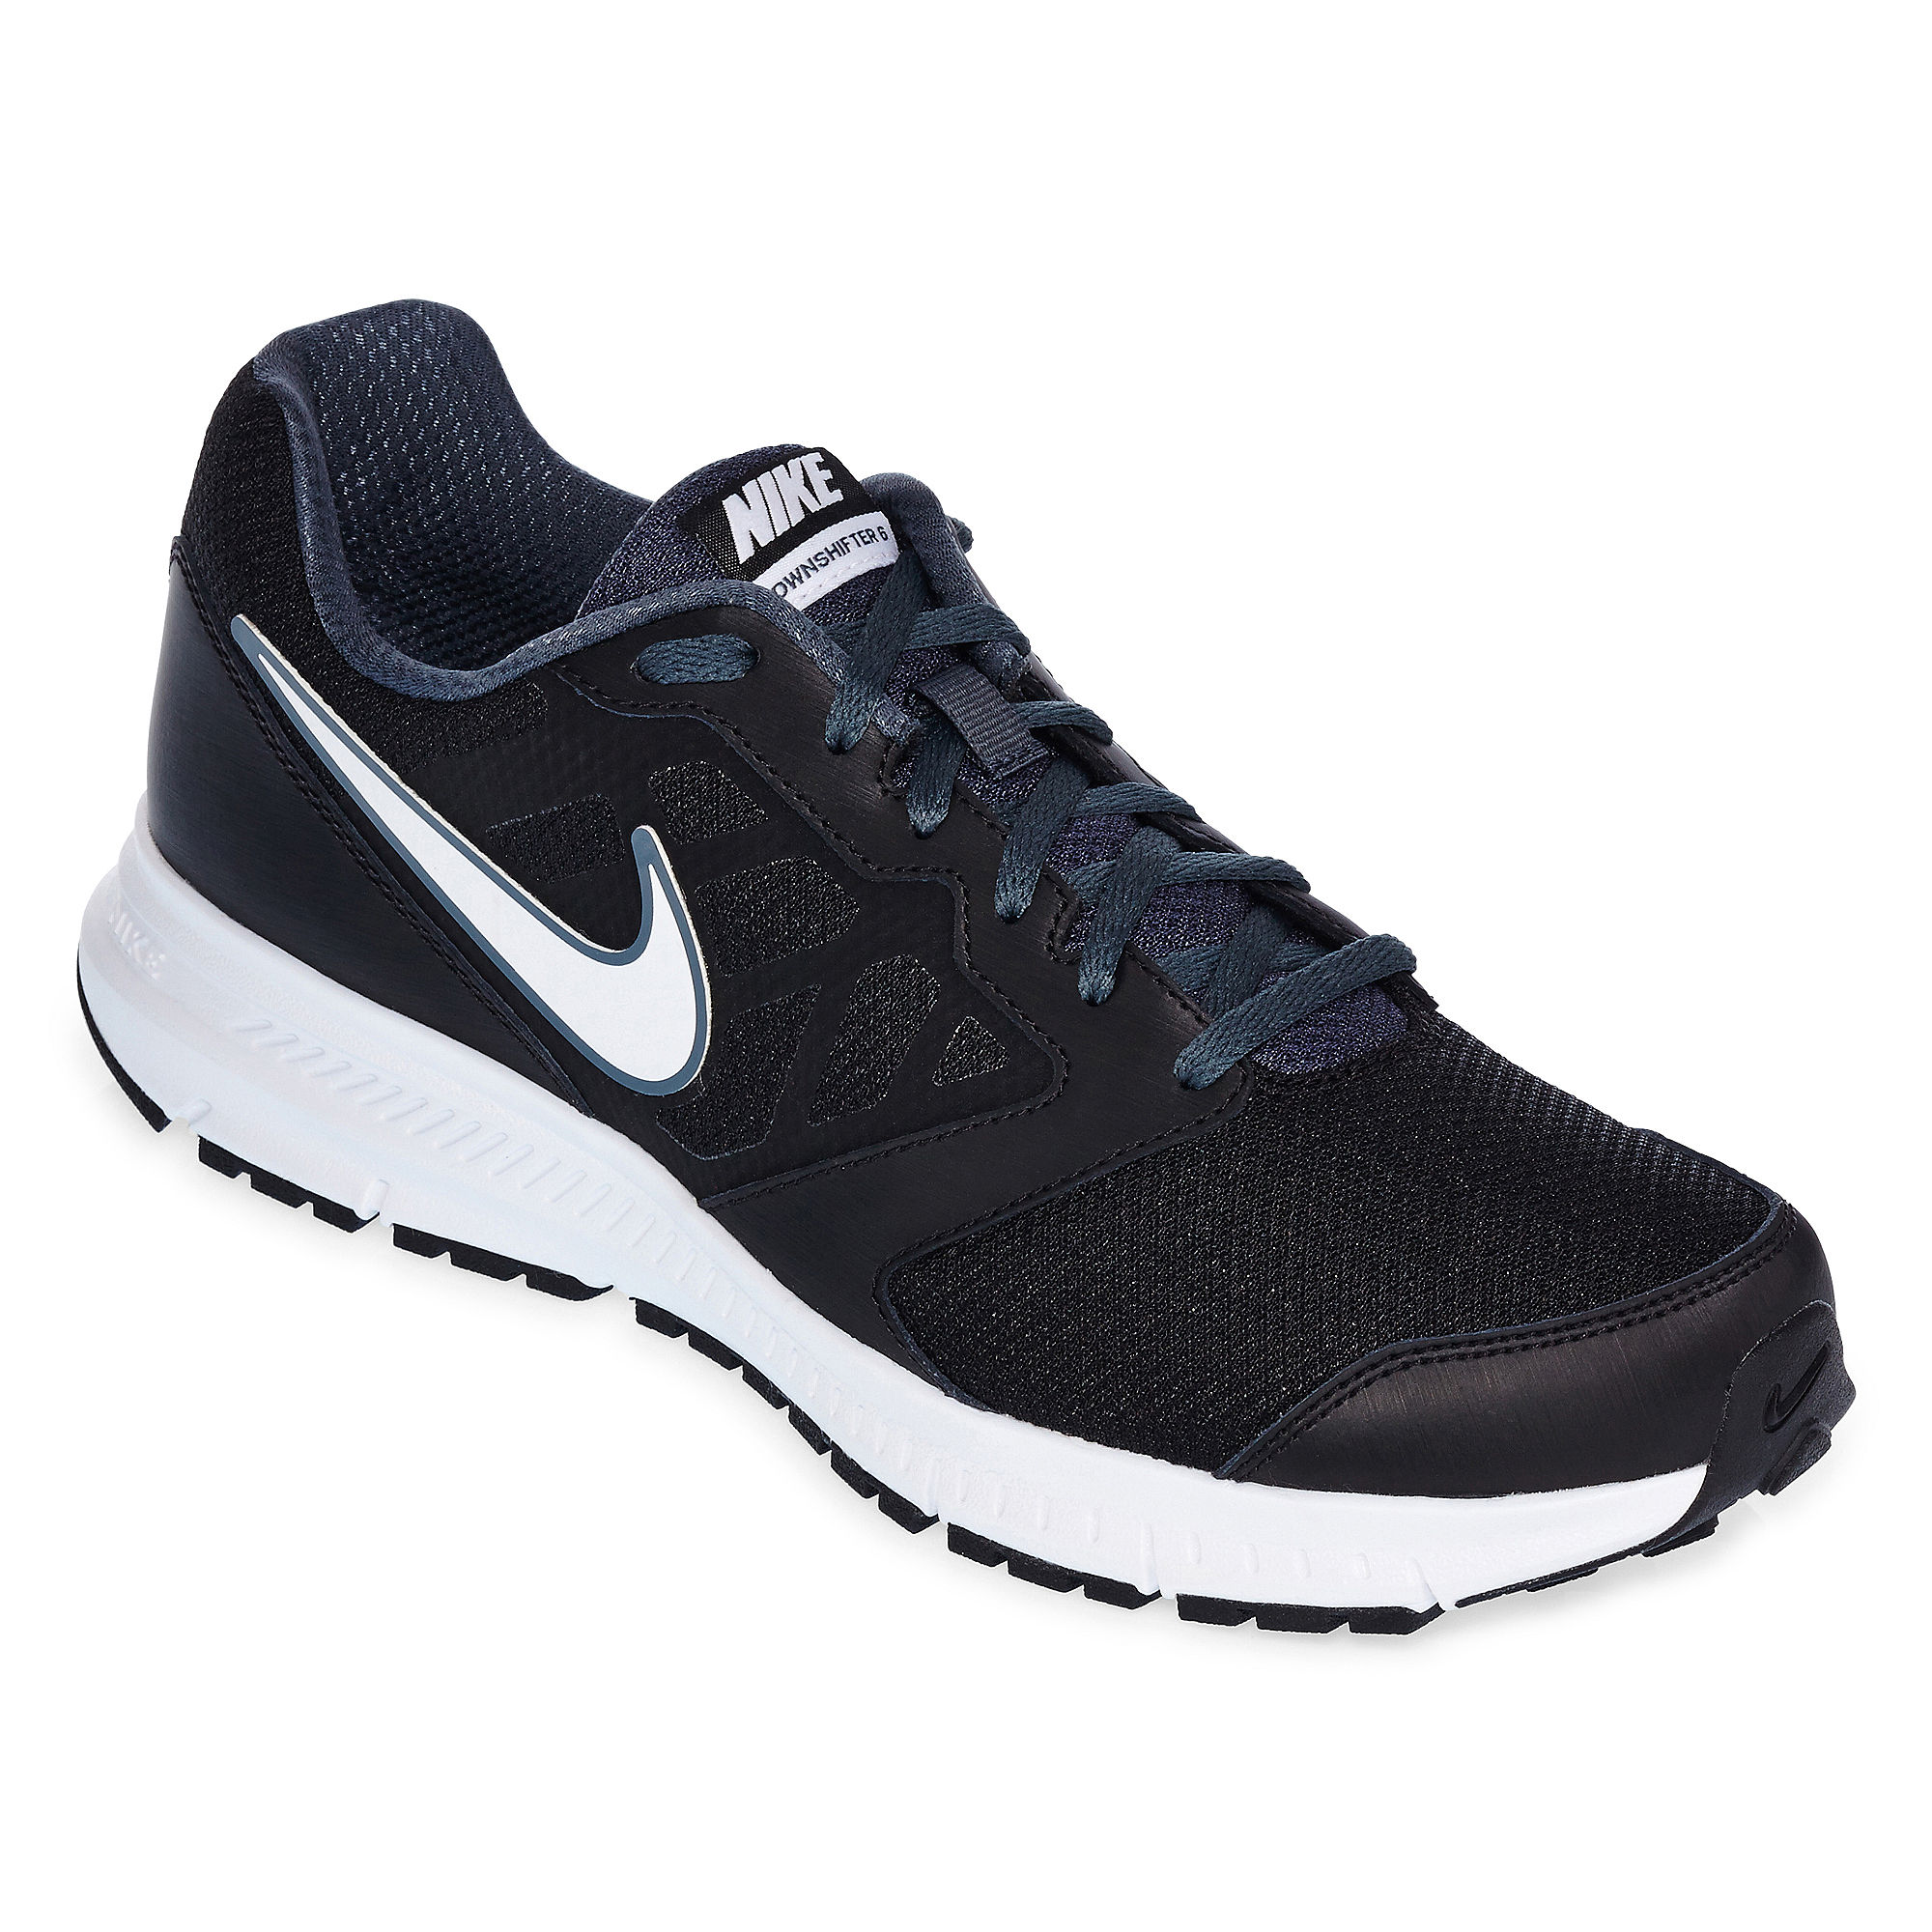 UPC 820652611481 - Nike Men's Downshifter 6 Running Sneakers from ...